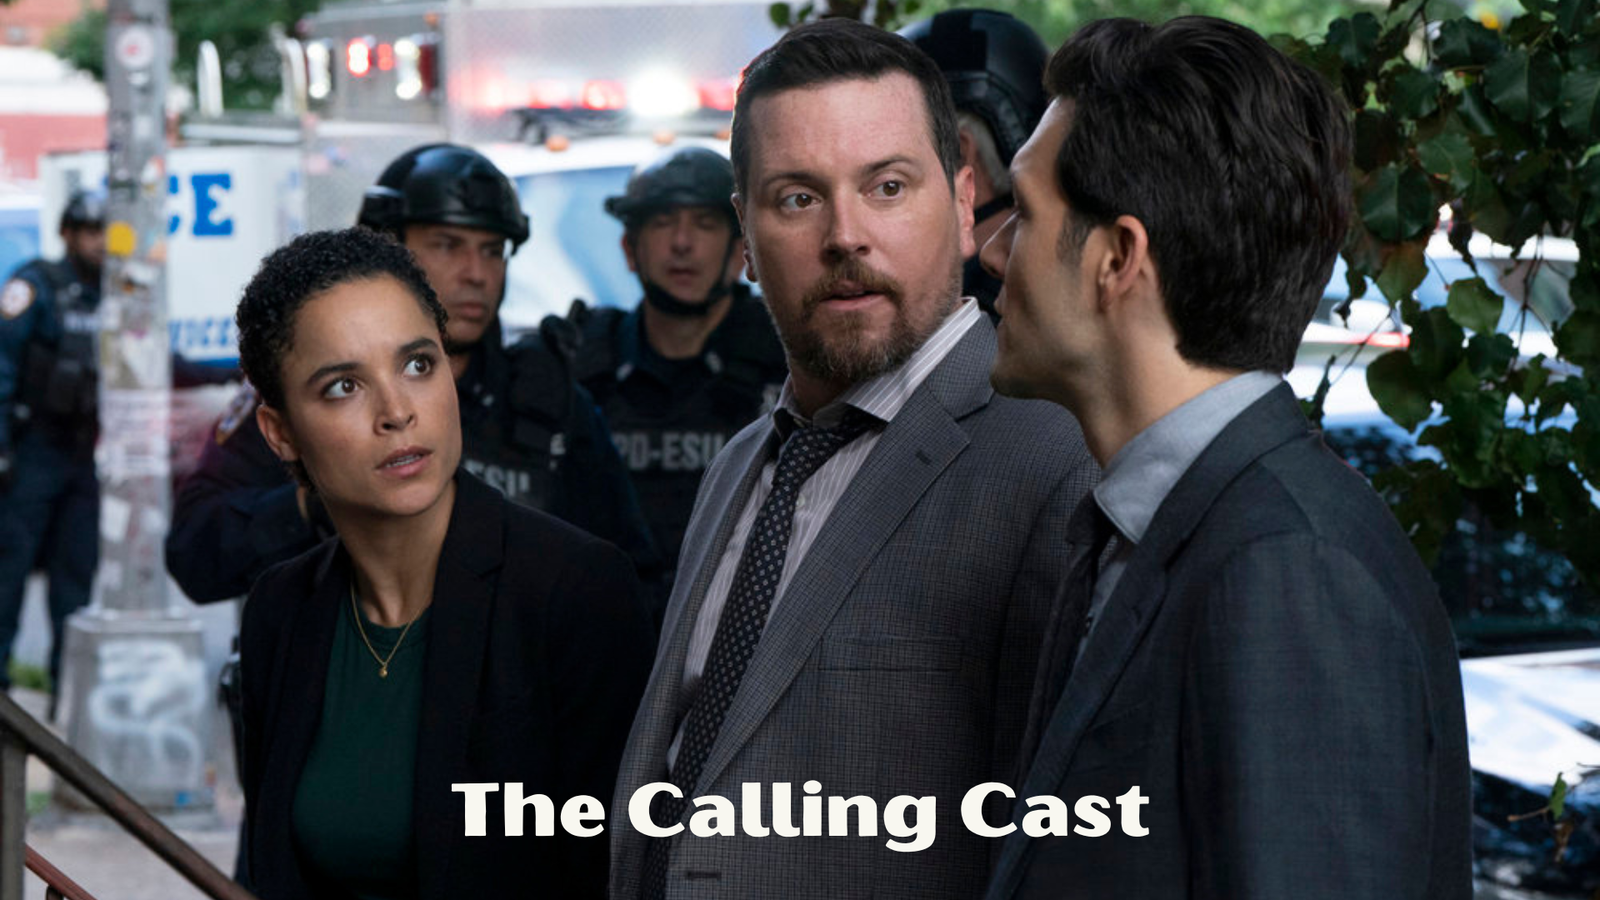 The Calling Cast